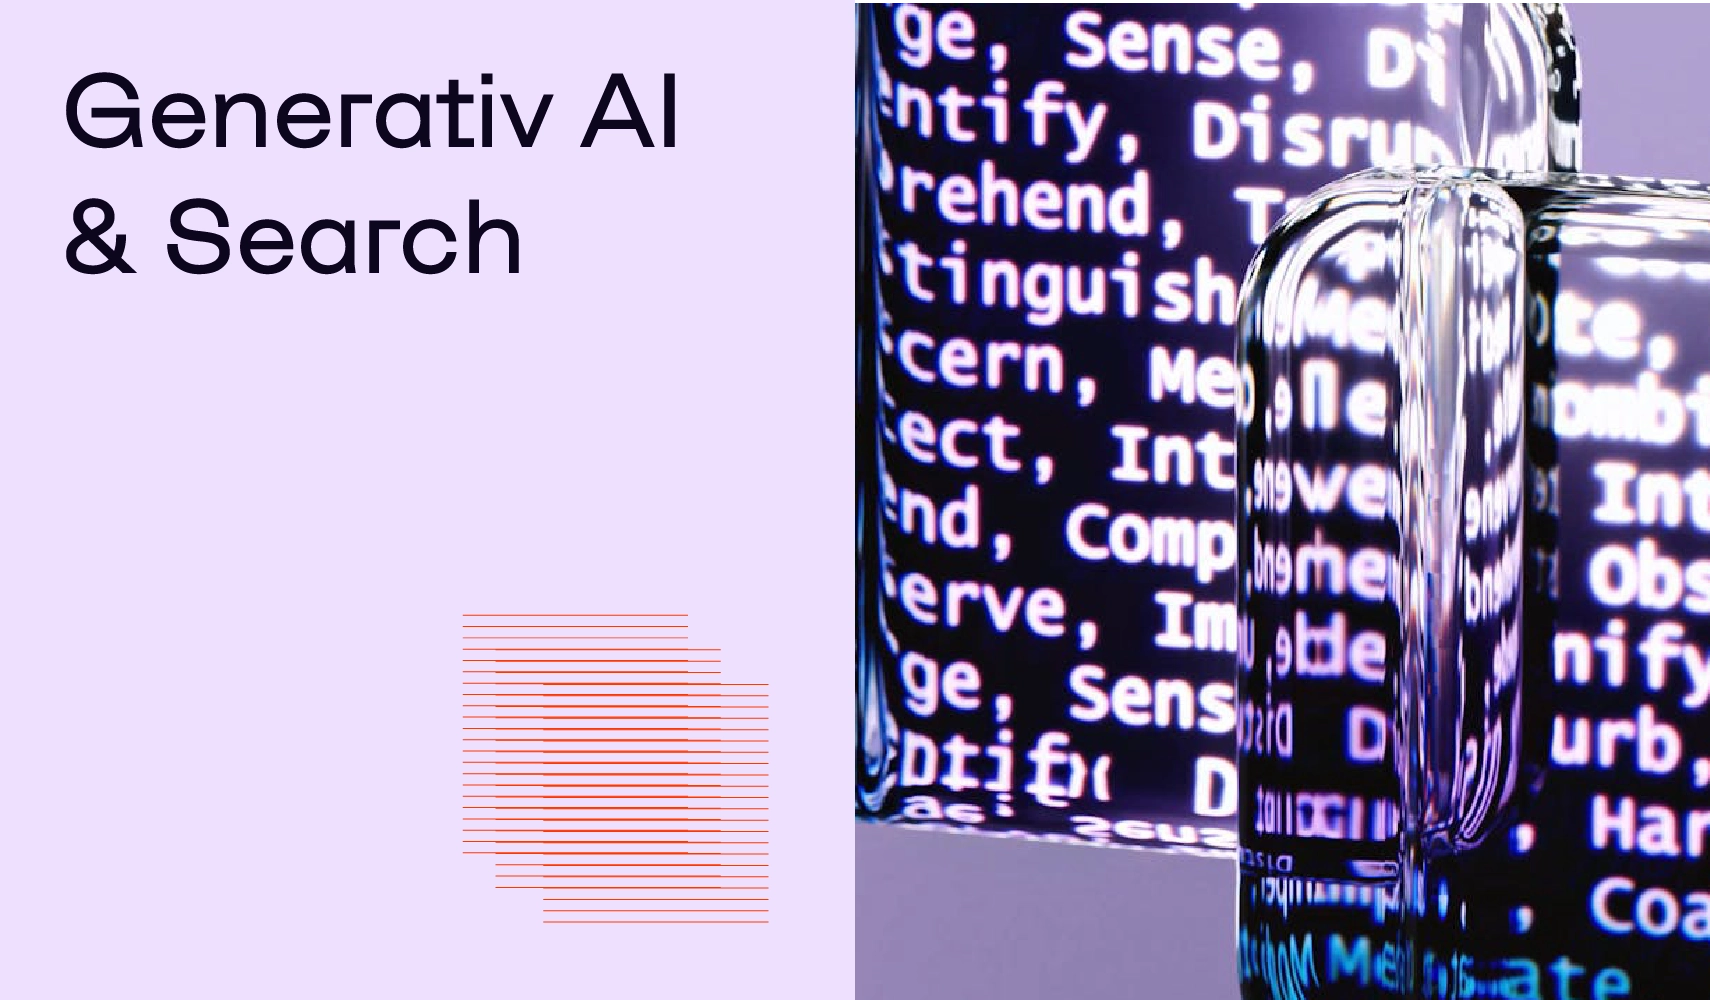 how does gemini and generative AI affect google search?